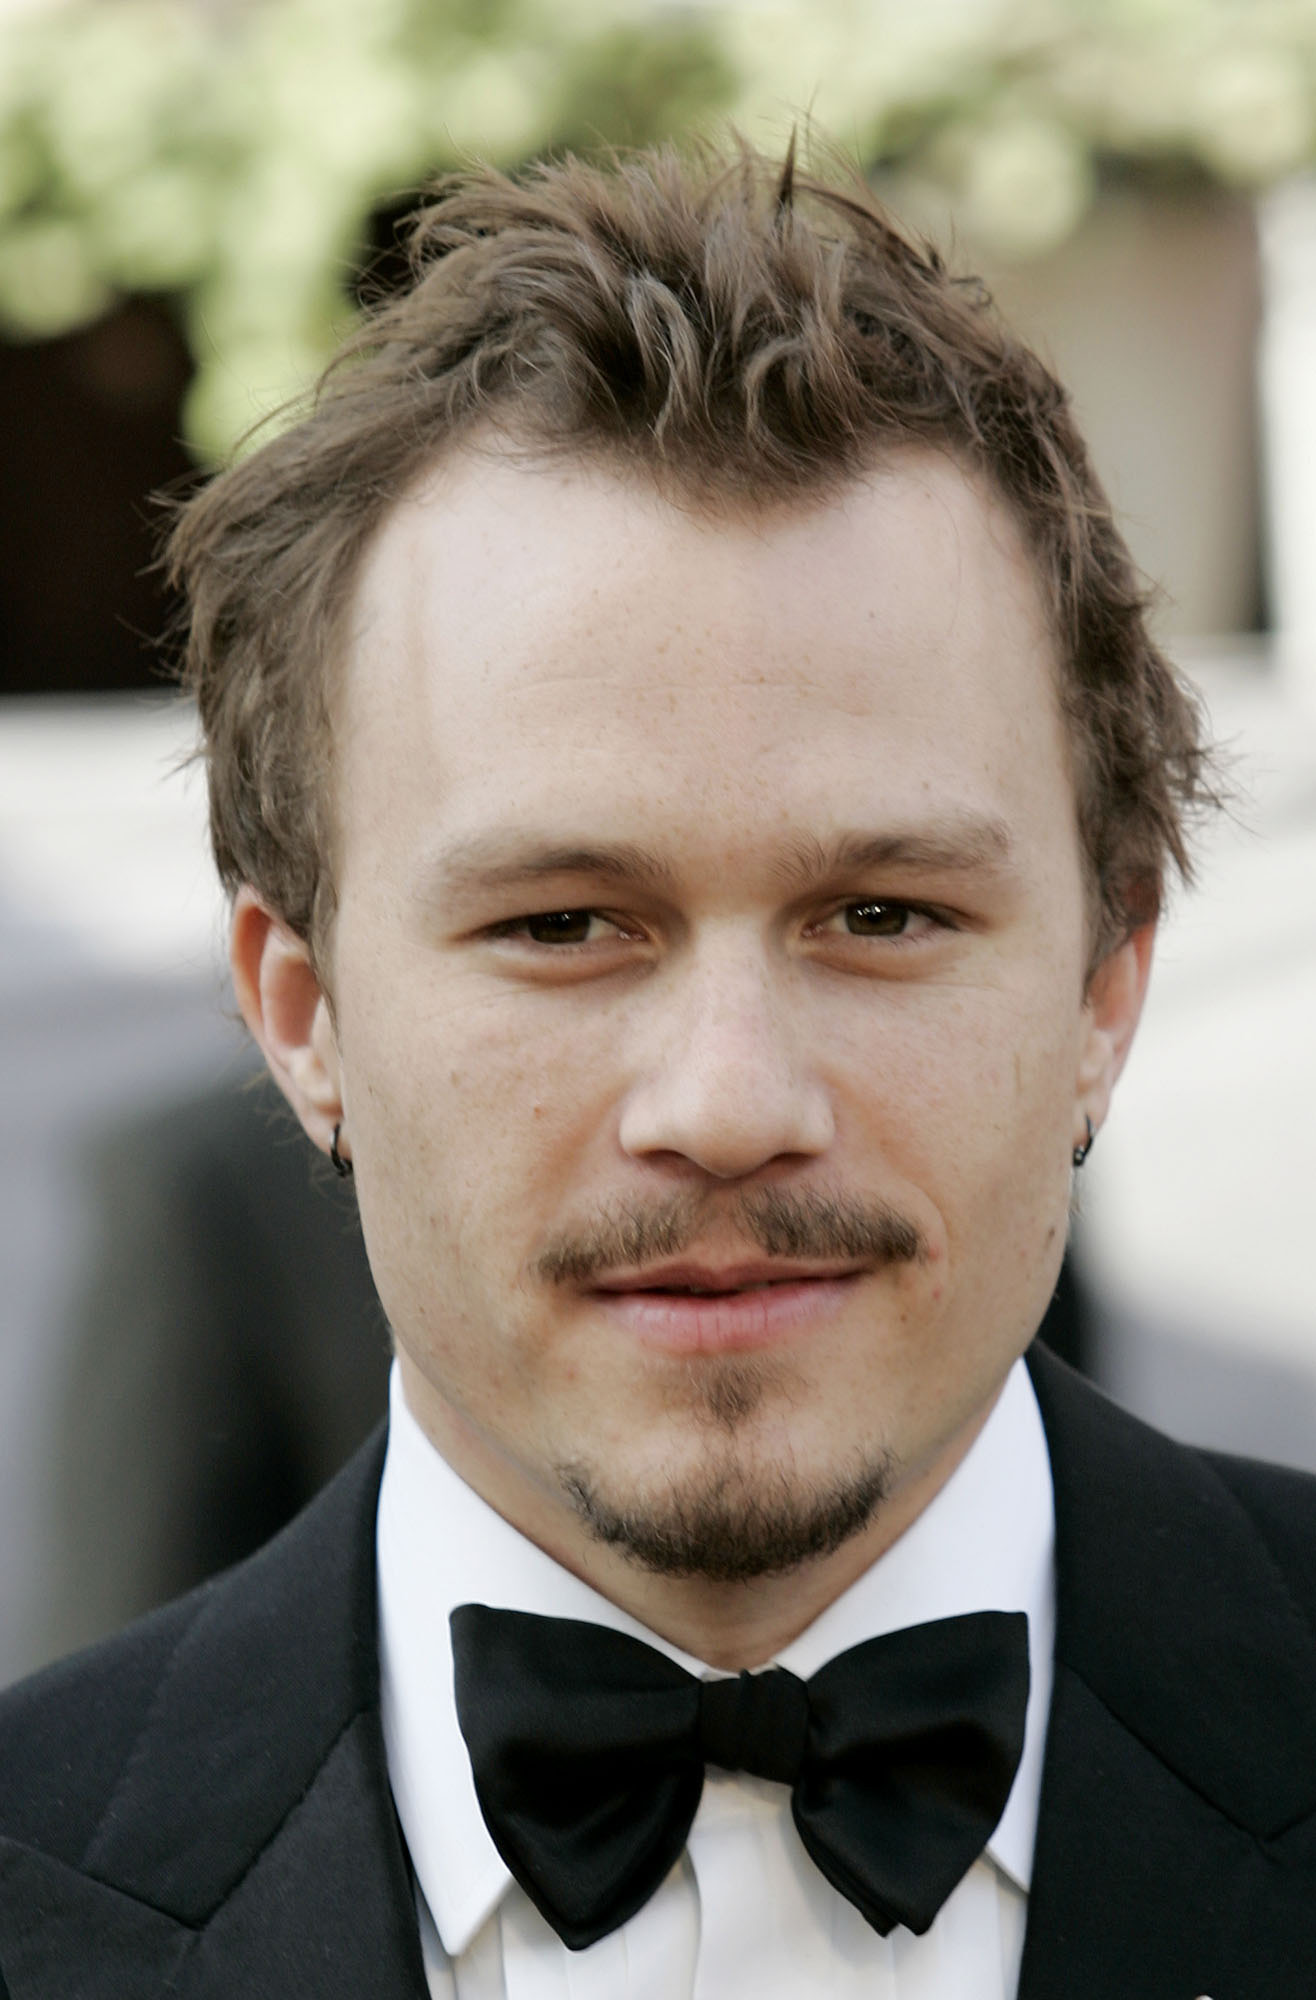 Heath Ledger attends the 78th Academy Awards in Los Angeles, California on March 5, 2006 | Source: Getty Images